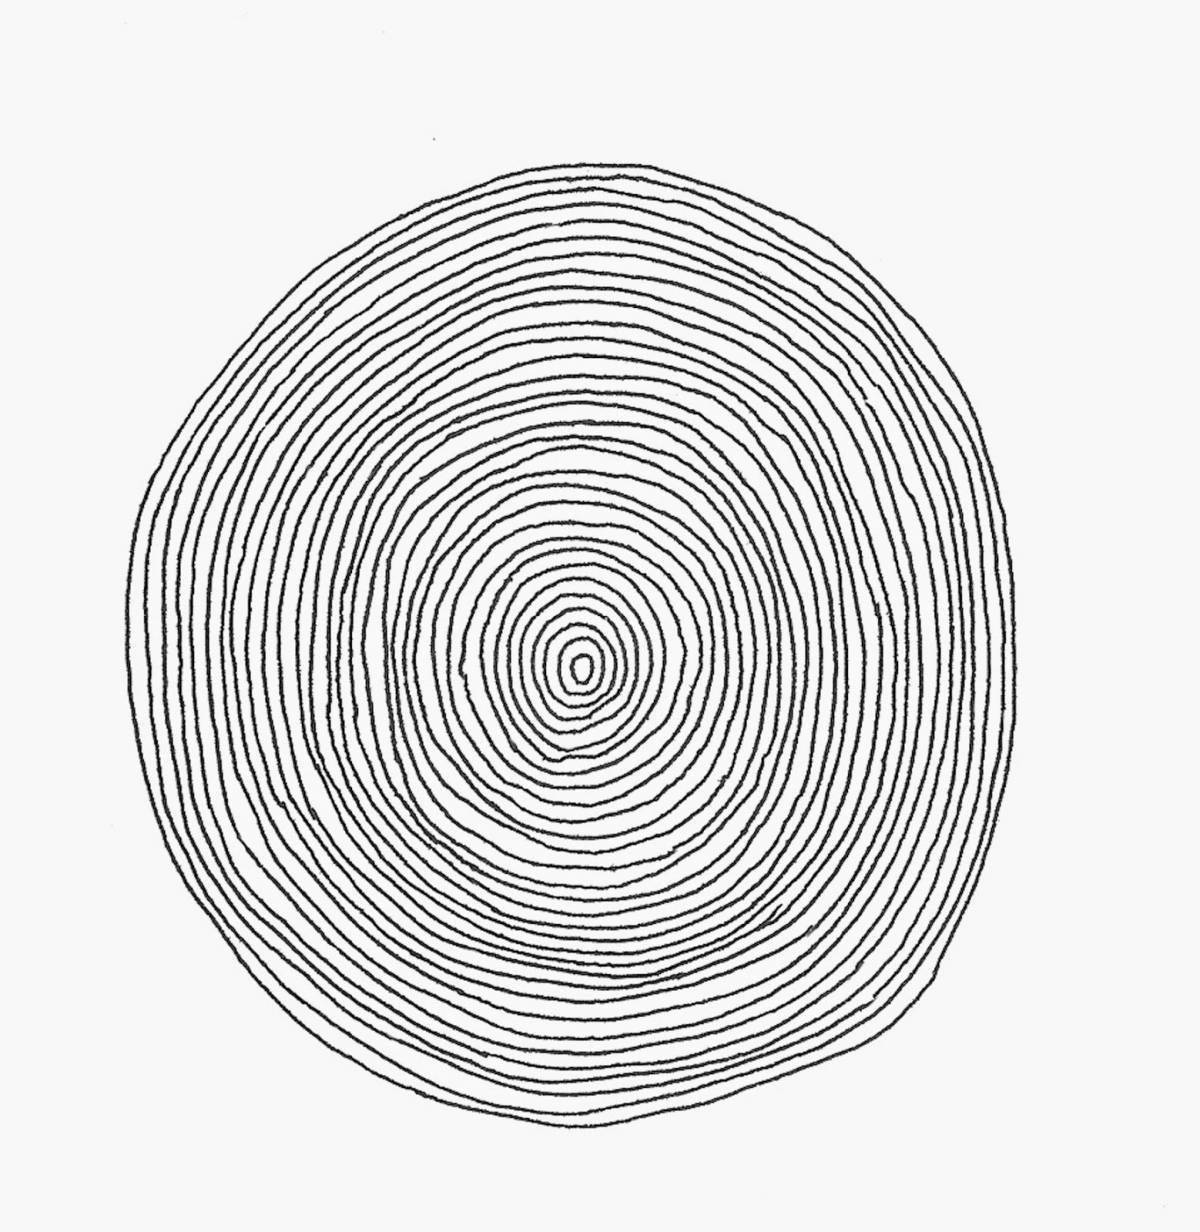 Coloring live circle with lines